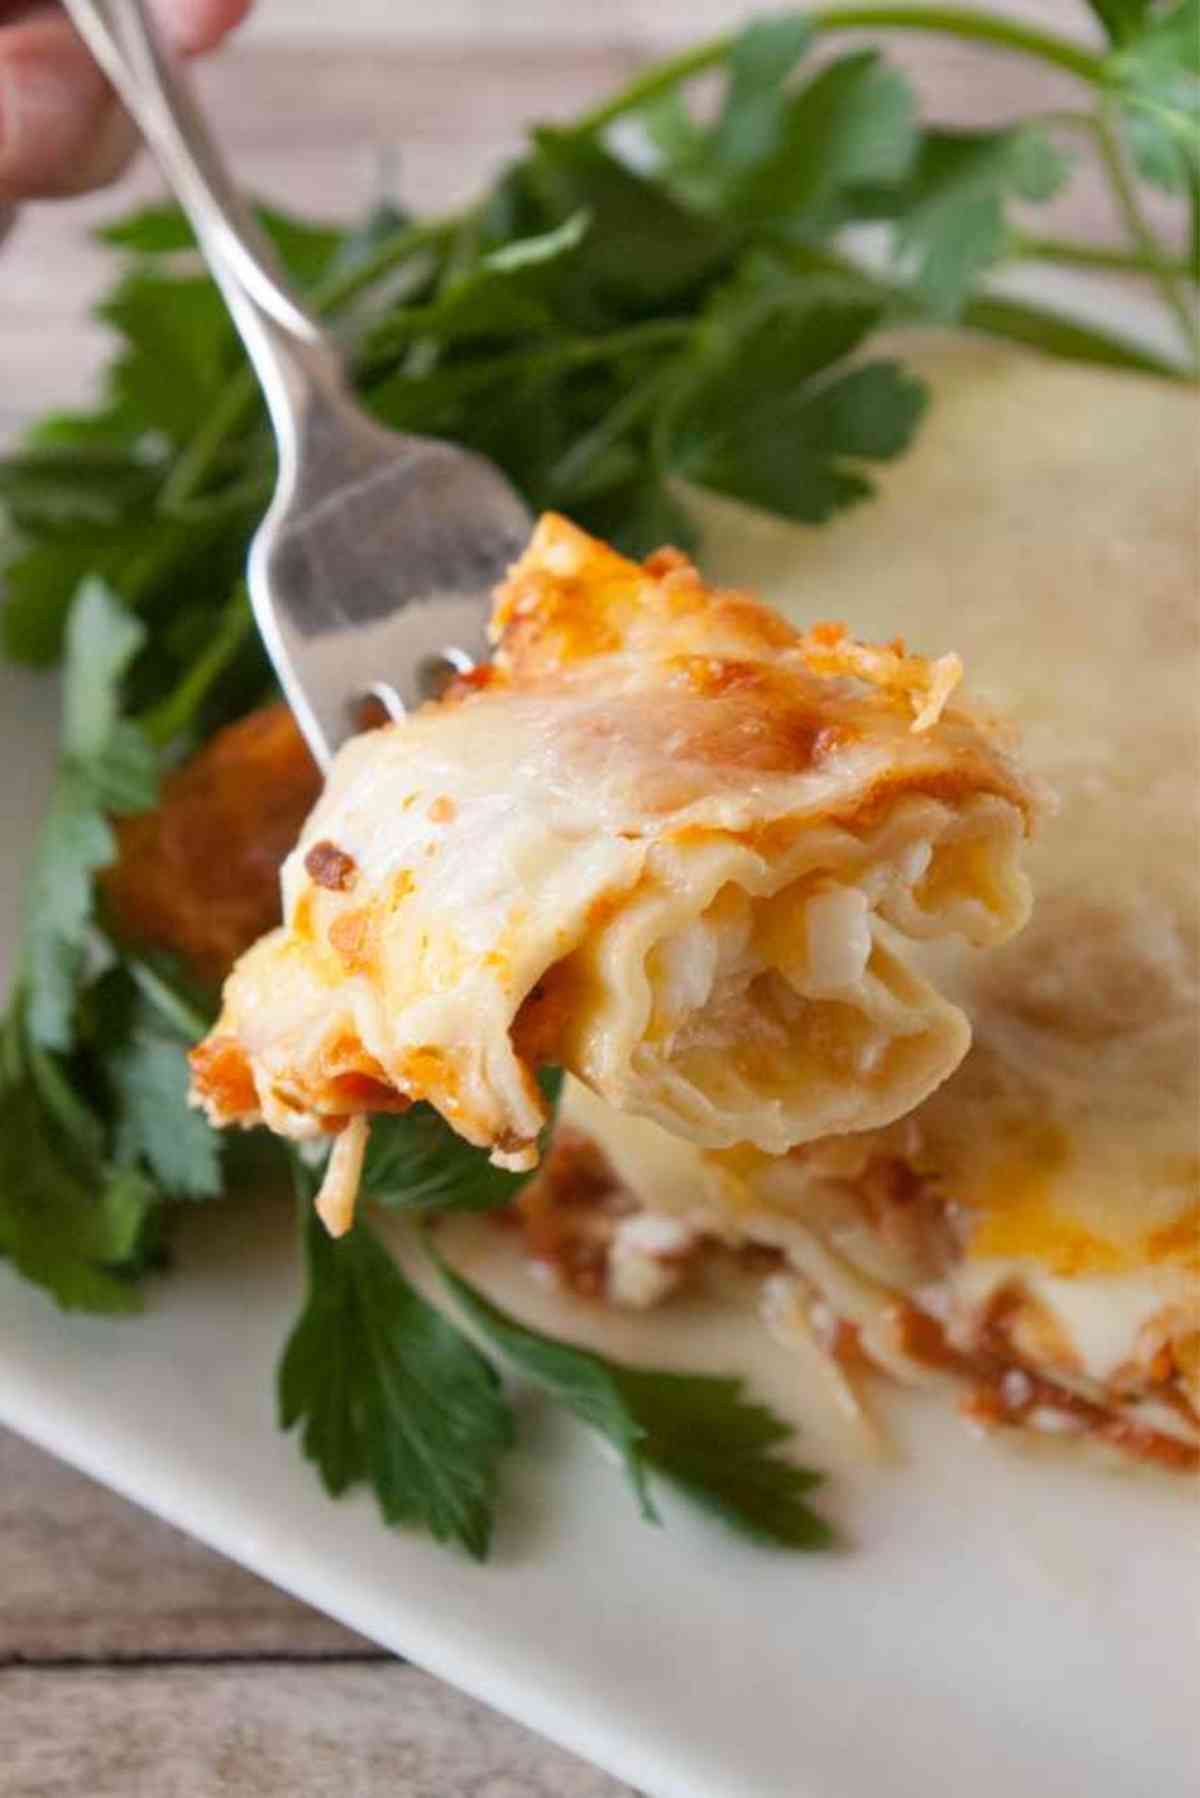 A fork lifting a bite of three cheese manicotti up from the plate.